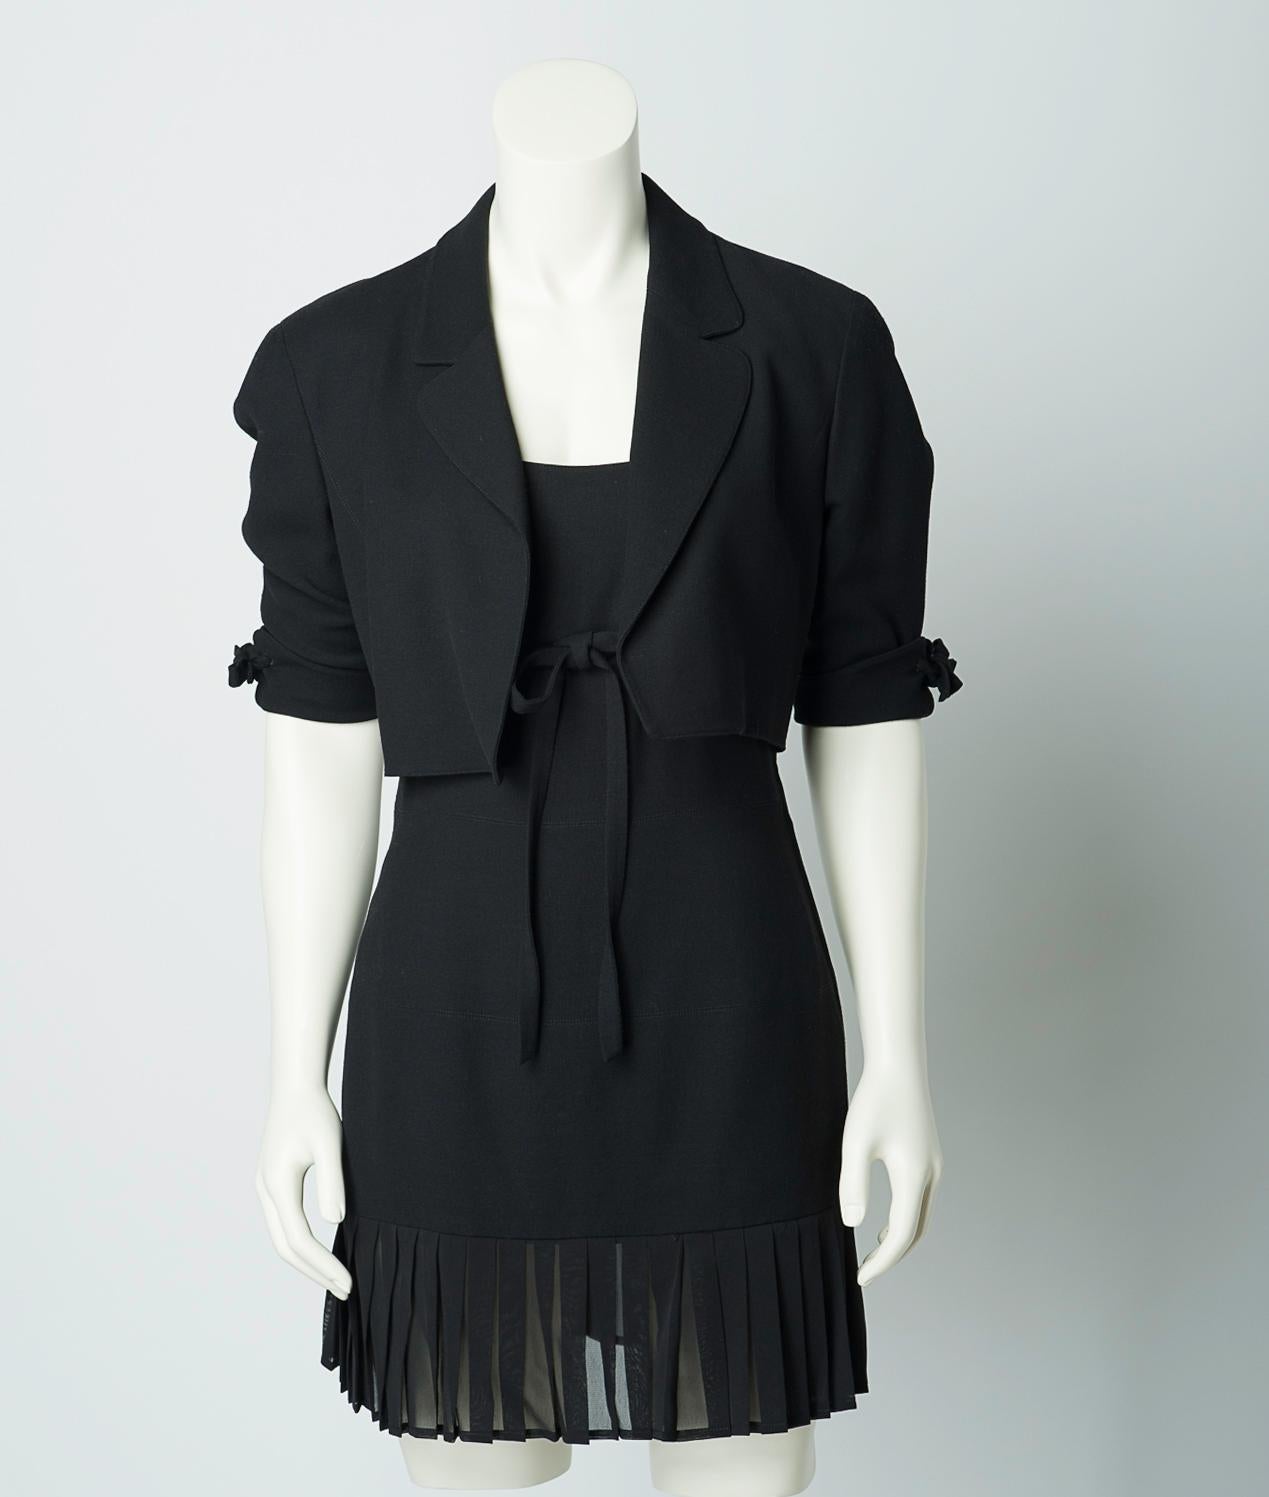 Claude Montana vintage 1980s black mini dress and cropped jacket set. 
Black sleeveless dress features sheer pleated trim and tie detail at empire waist. Open front jacket features tie detail at sleeves.

40% viscose, 40% wool, 20% silk.
Trimmed in